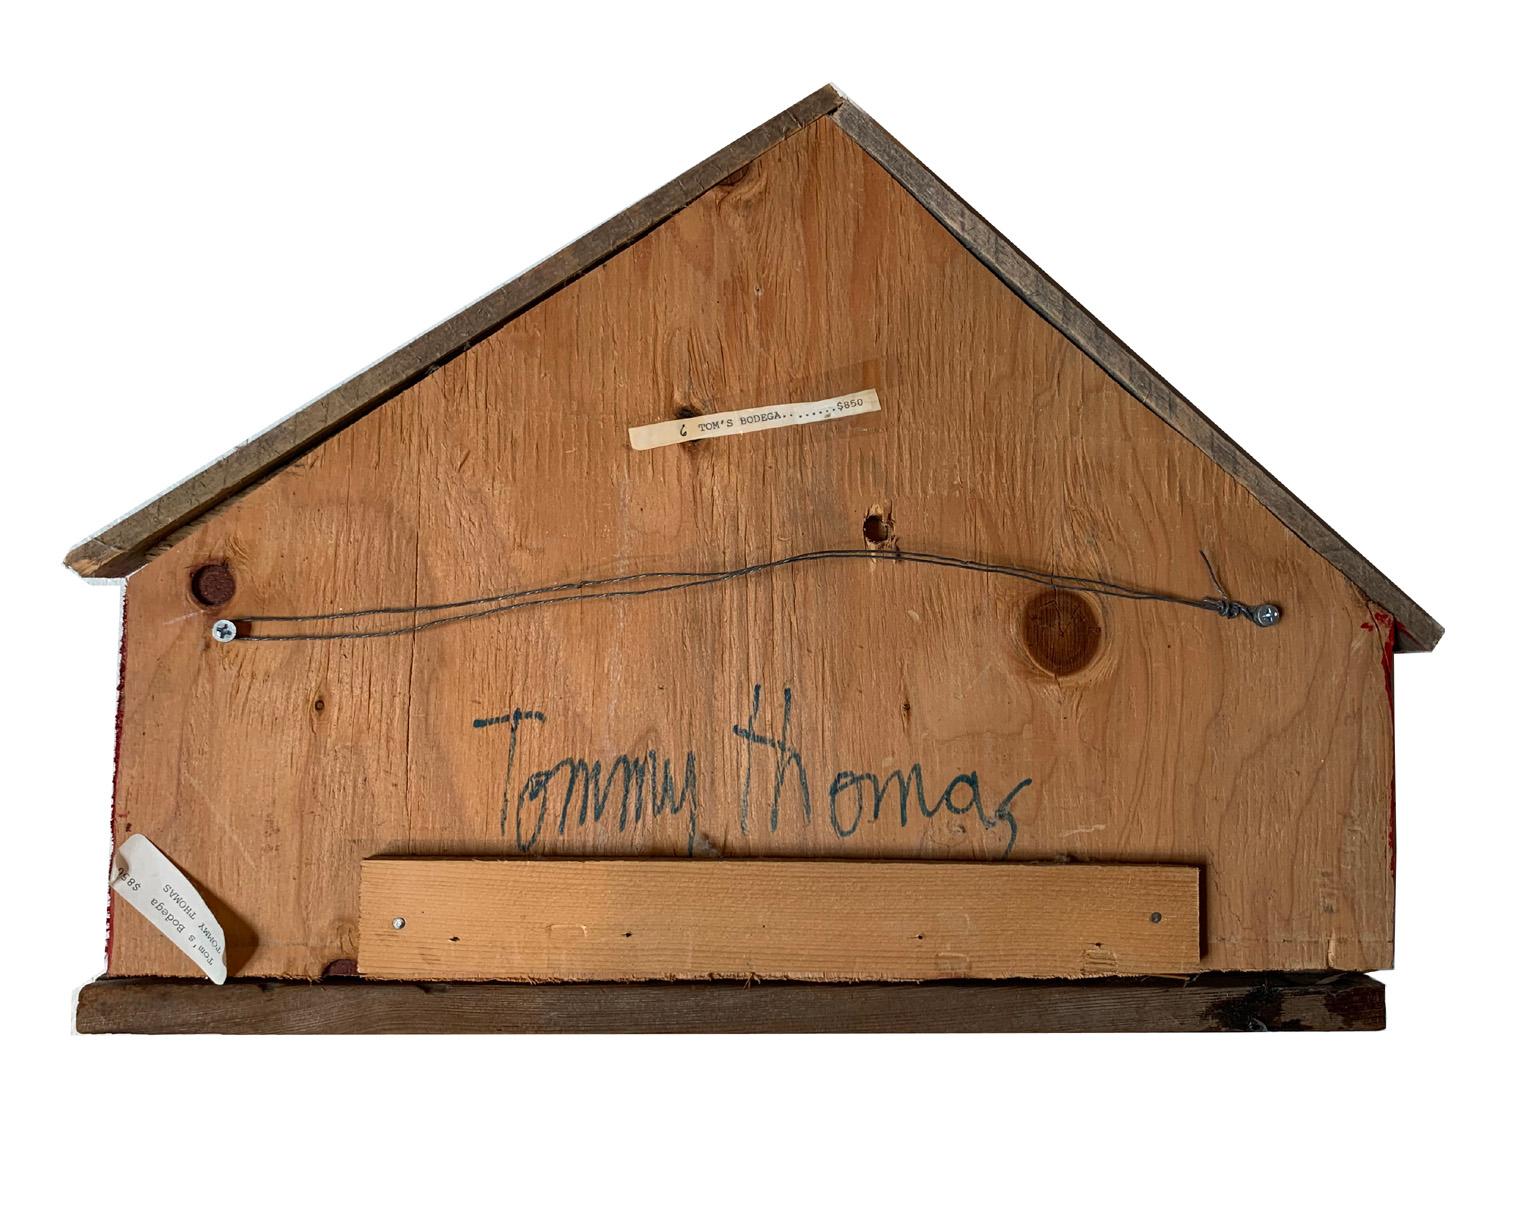 A beautiful one of a kind Tom's Bodega by popular artist Mary “Tommy” Thomas. She was born and raised in Saugus, Massachusetts. After her parents divorced, she followed her mother to New York City where, “after a stint in secretarial school and a